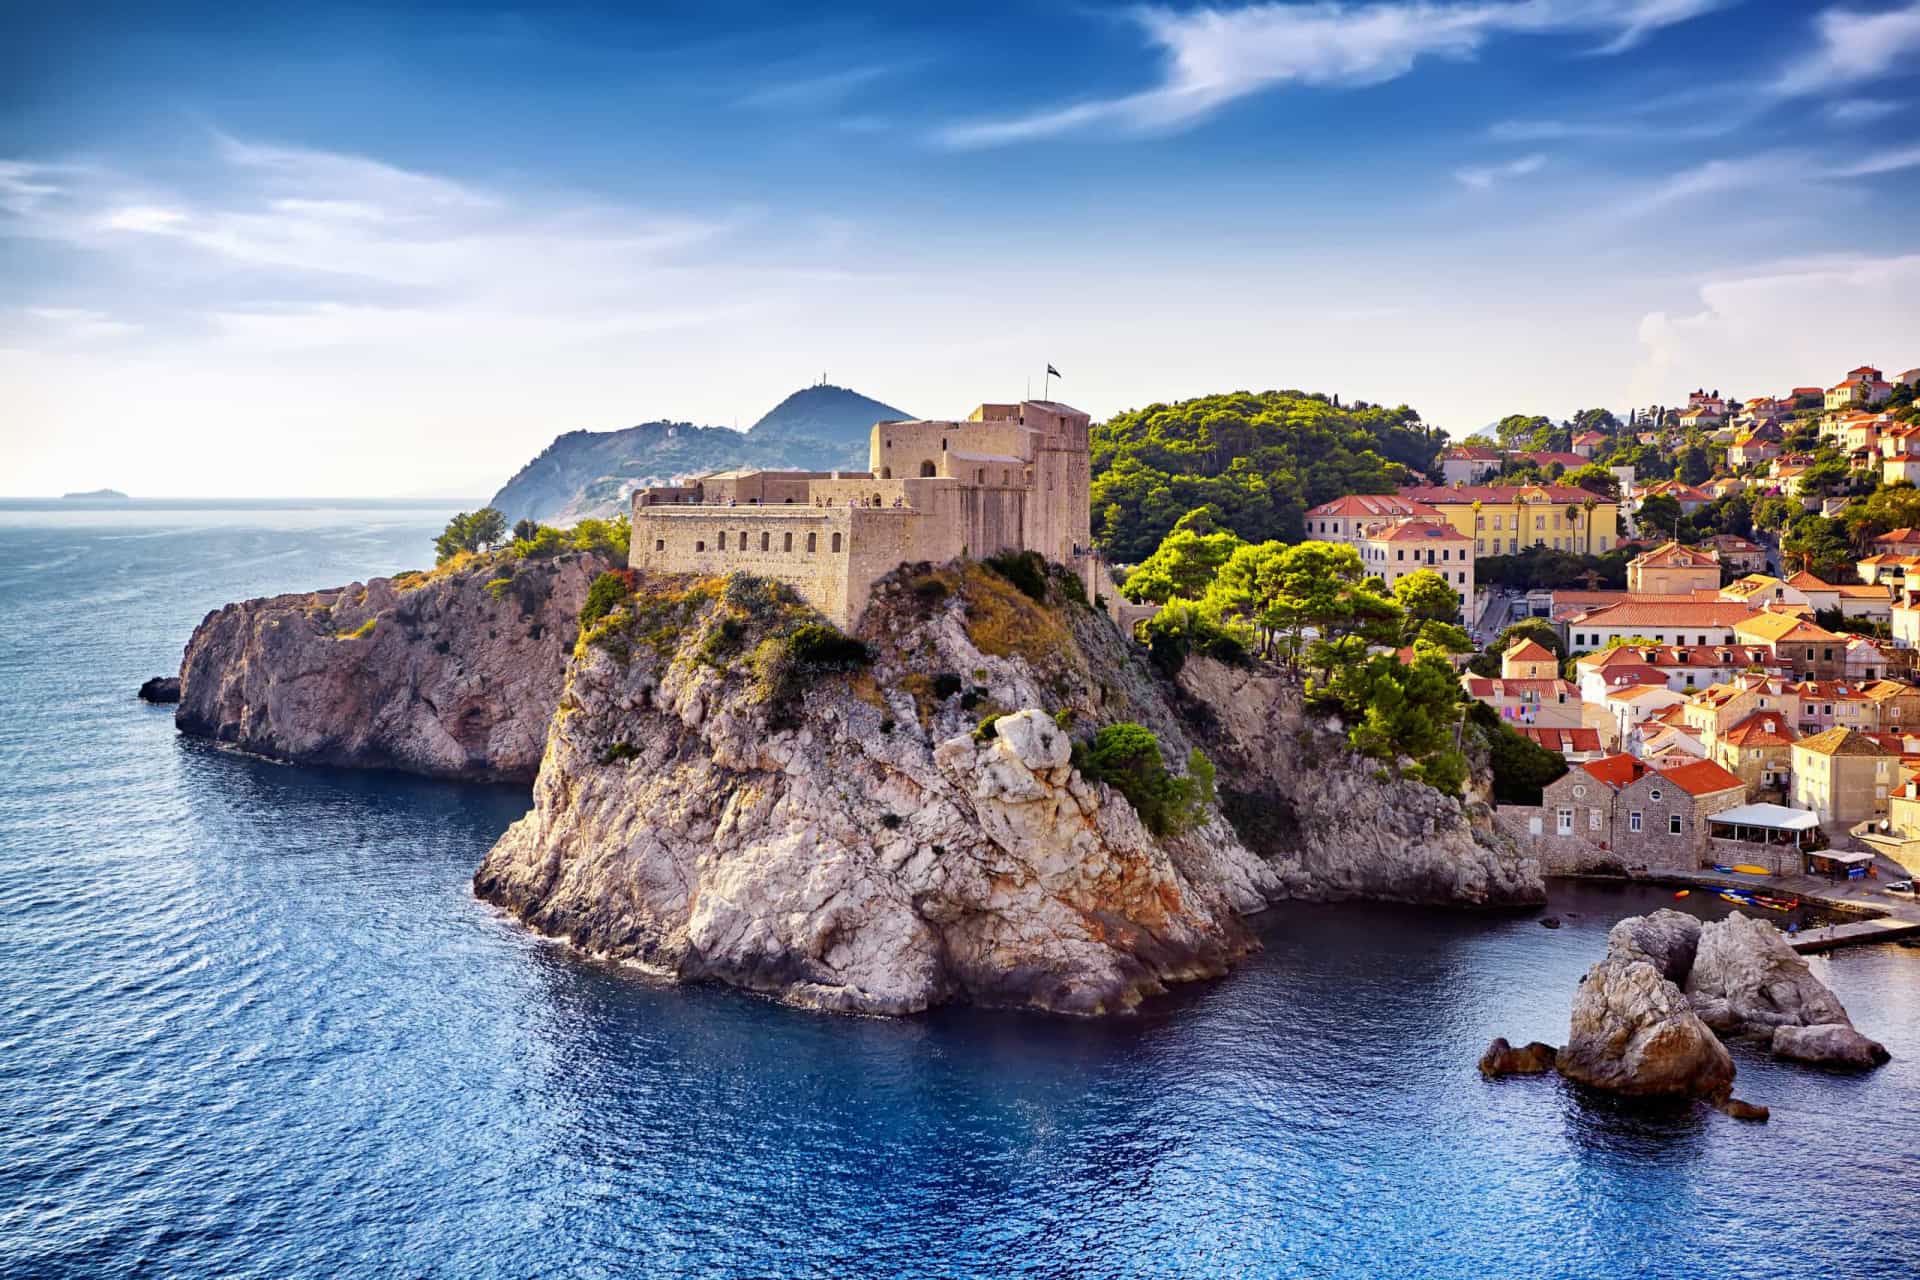 <p>Another former Dubrovnik stronghold worth investigation is Fort Lovrijenac. Dating back to the 11th century and persistent Venetian insurgency, the fort played a vital role in protecting the town from attack.</p><p><a href="https://www.msn.com/en-us/community/channel/vid-7xx8mnucu55yw63we9va2gwr7uihbxwc68fxqp25x6tg4ftibpra?cvid=94631541bc0f4f89bfd59158d696ad7e">Follow us and access great exclusive content everyday</a></p>